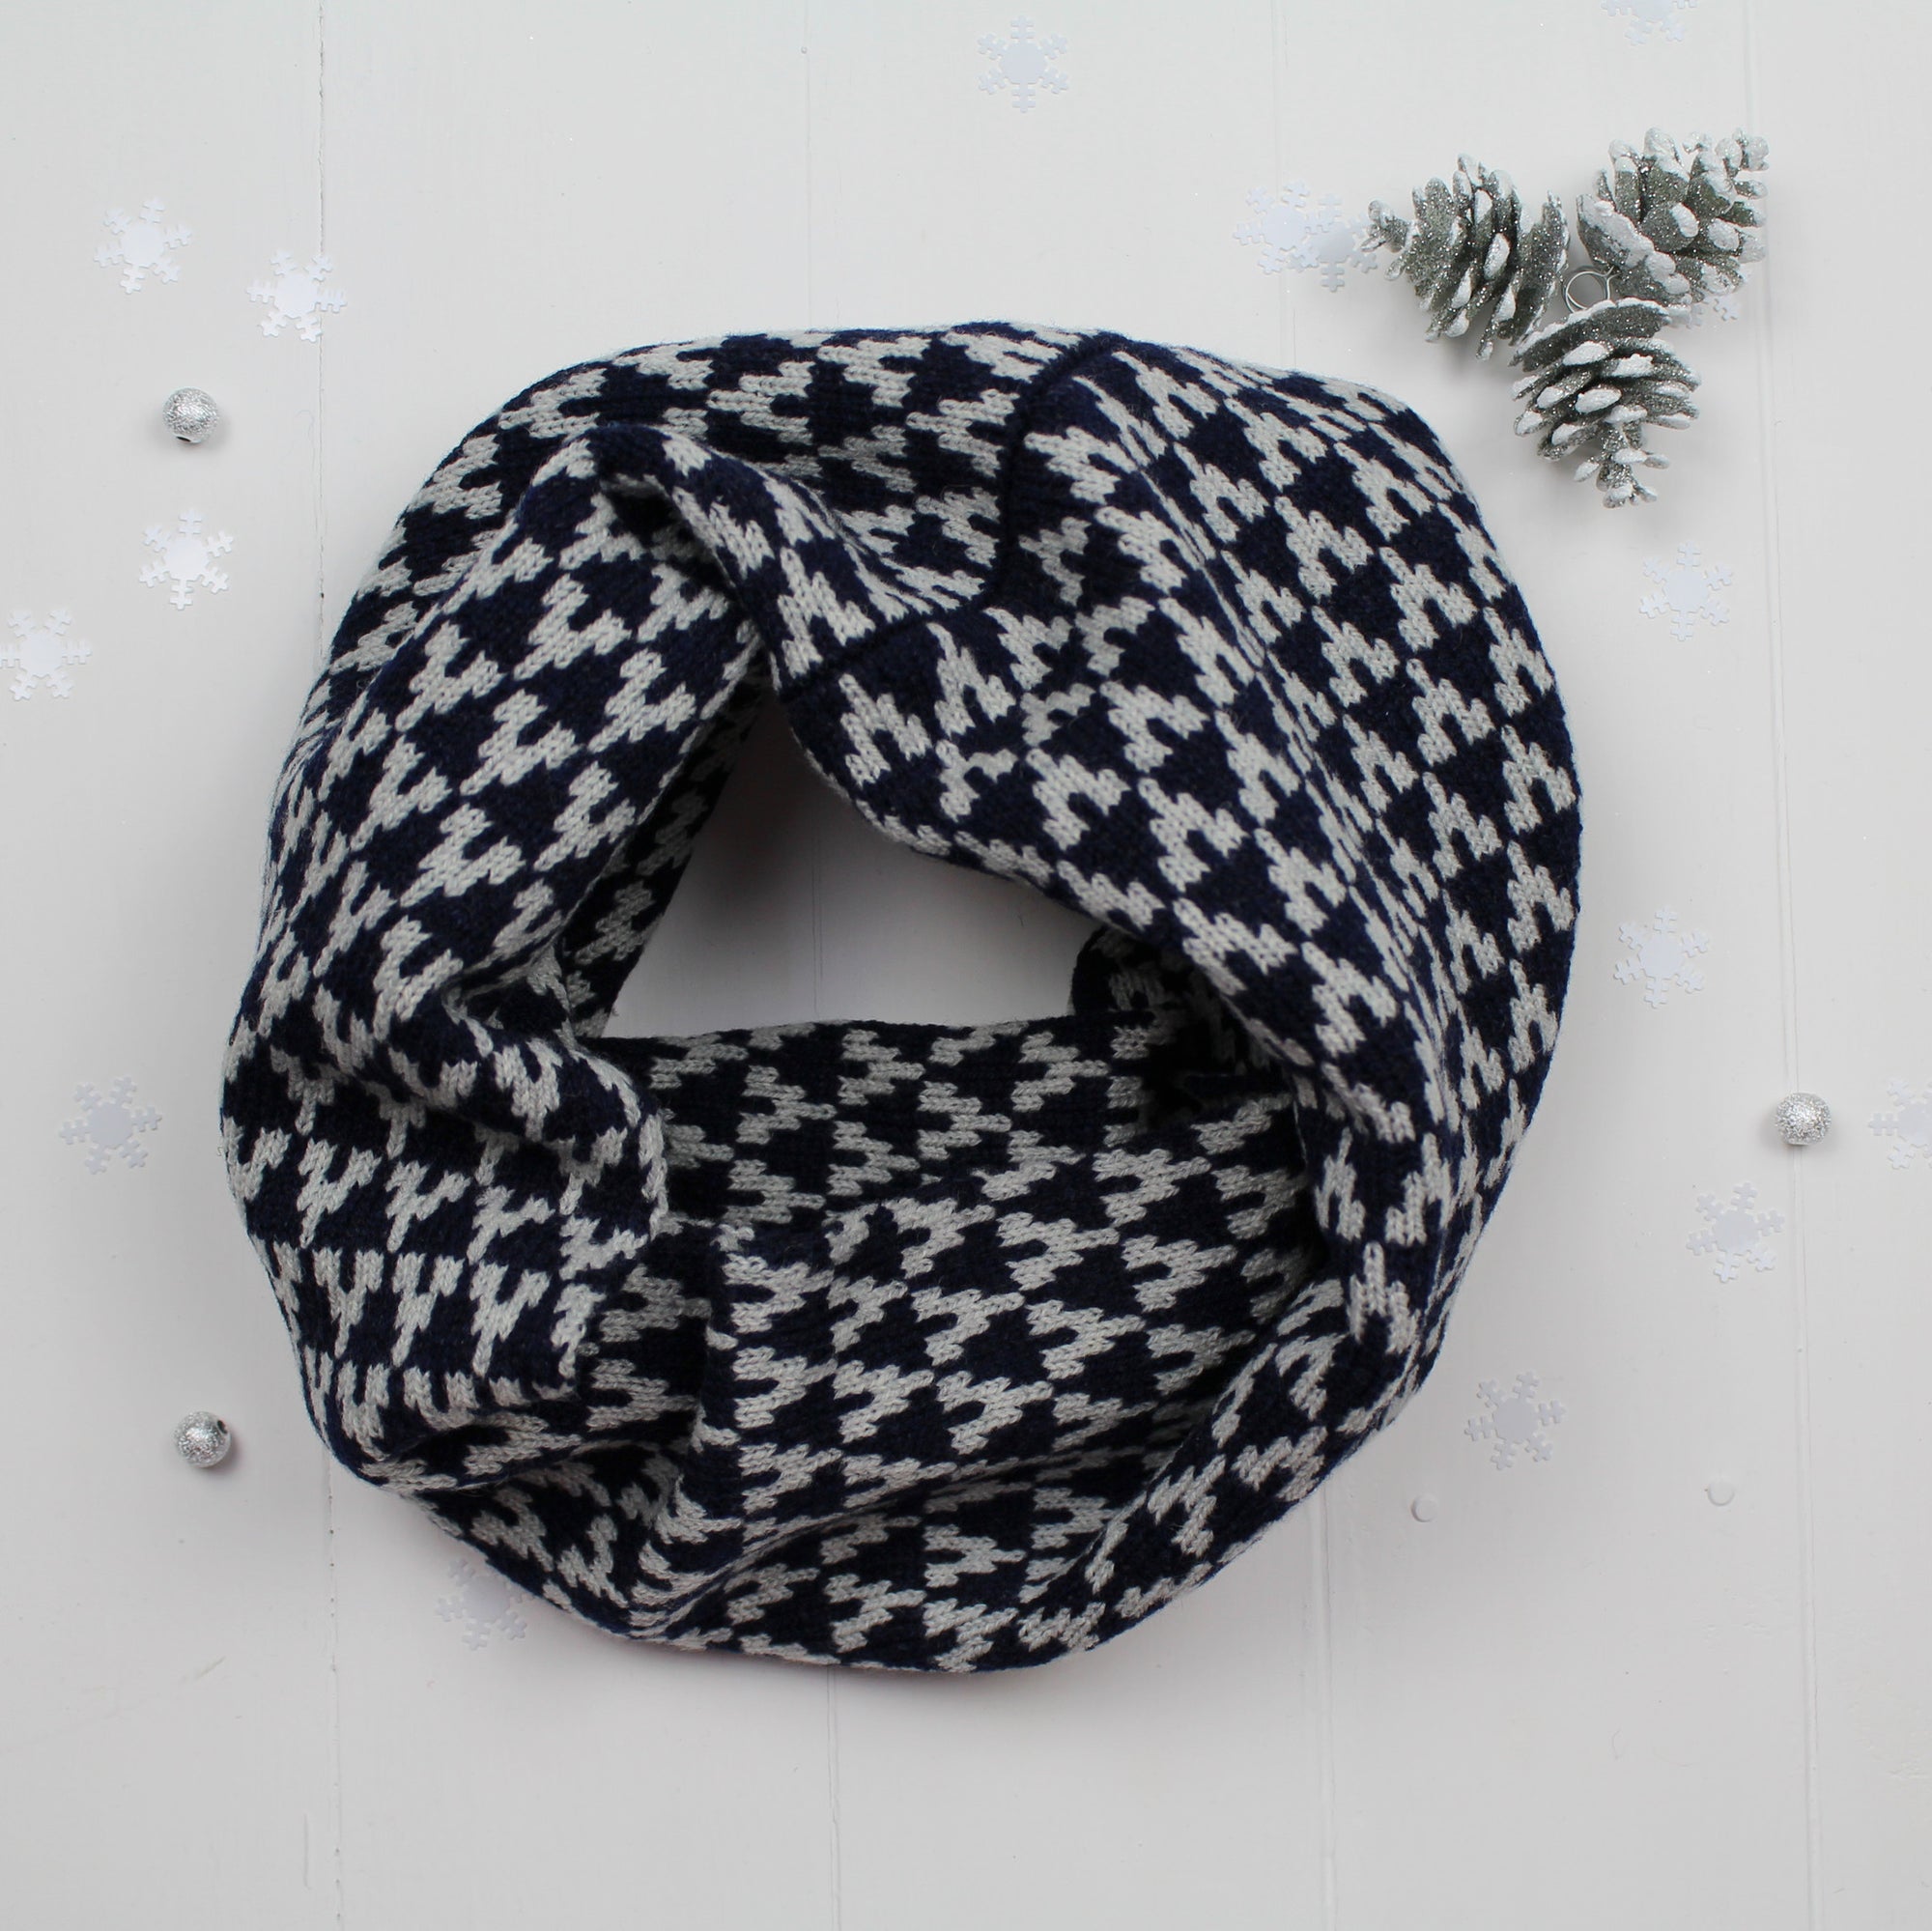 Arrow snood / cowl - navy / grey (MADE TO ORDER)